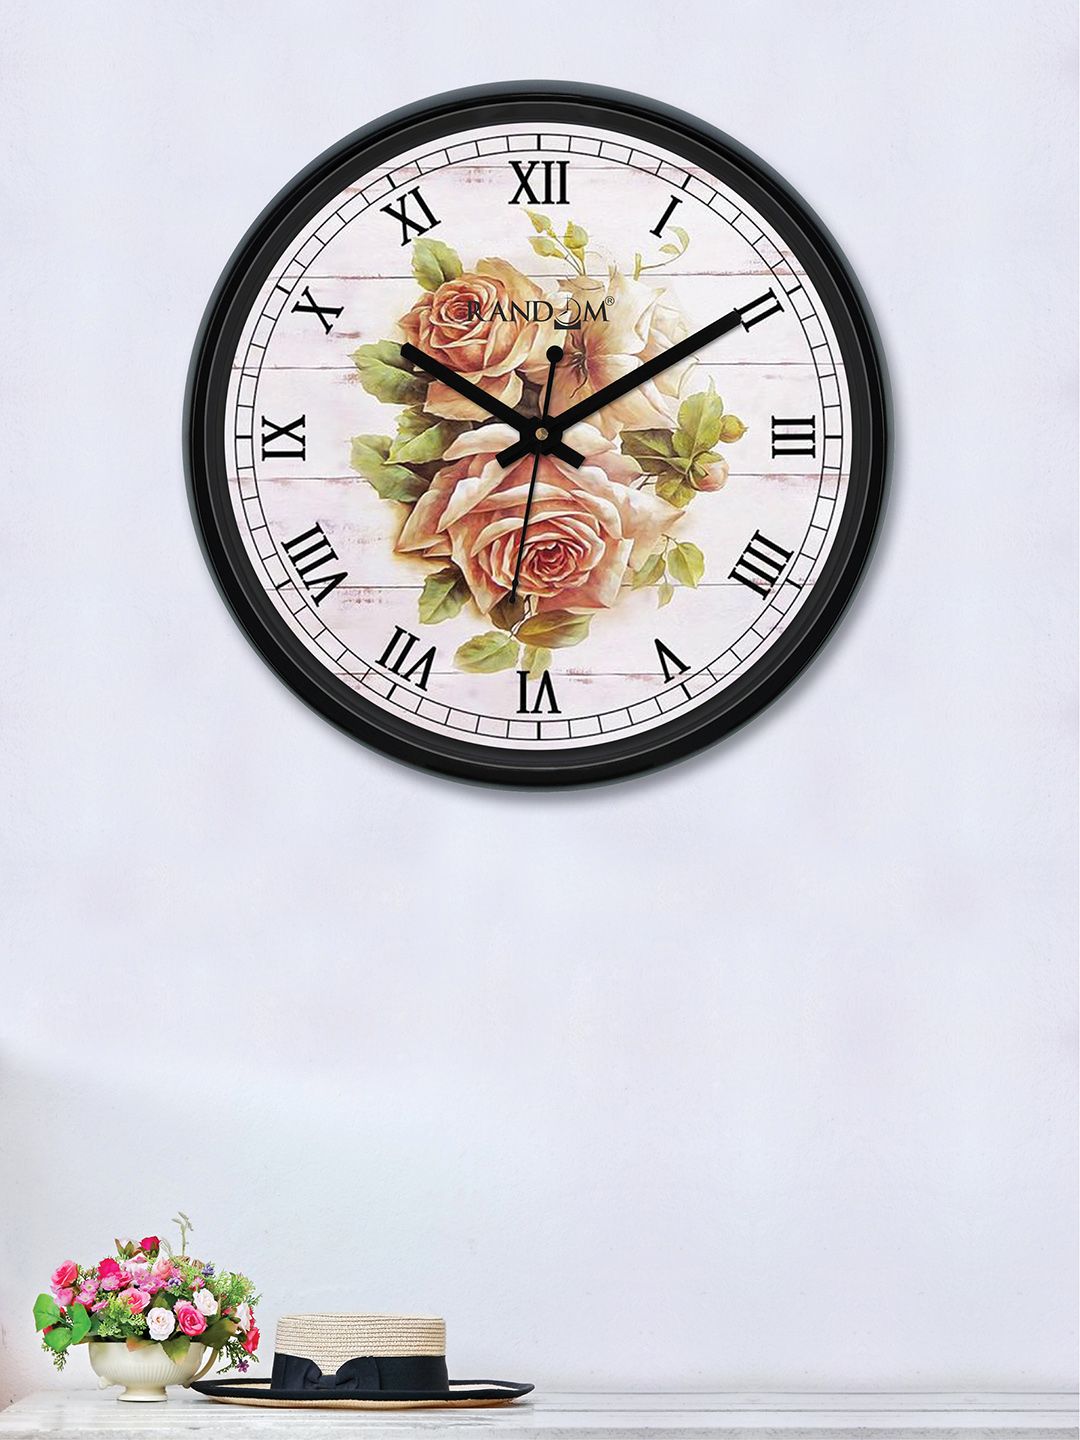 RANDOM Off-White & Rose Round Printed 30 cm Analogue Wall Clock Price in India